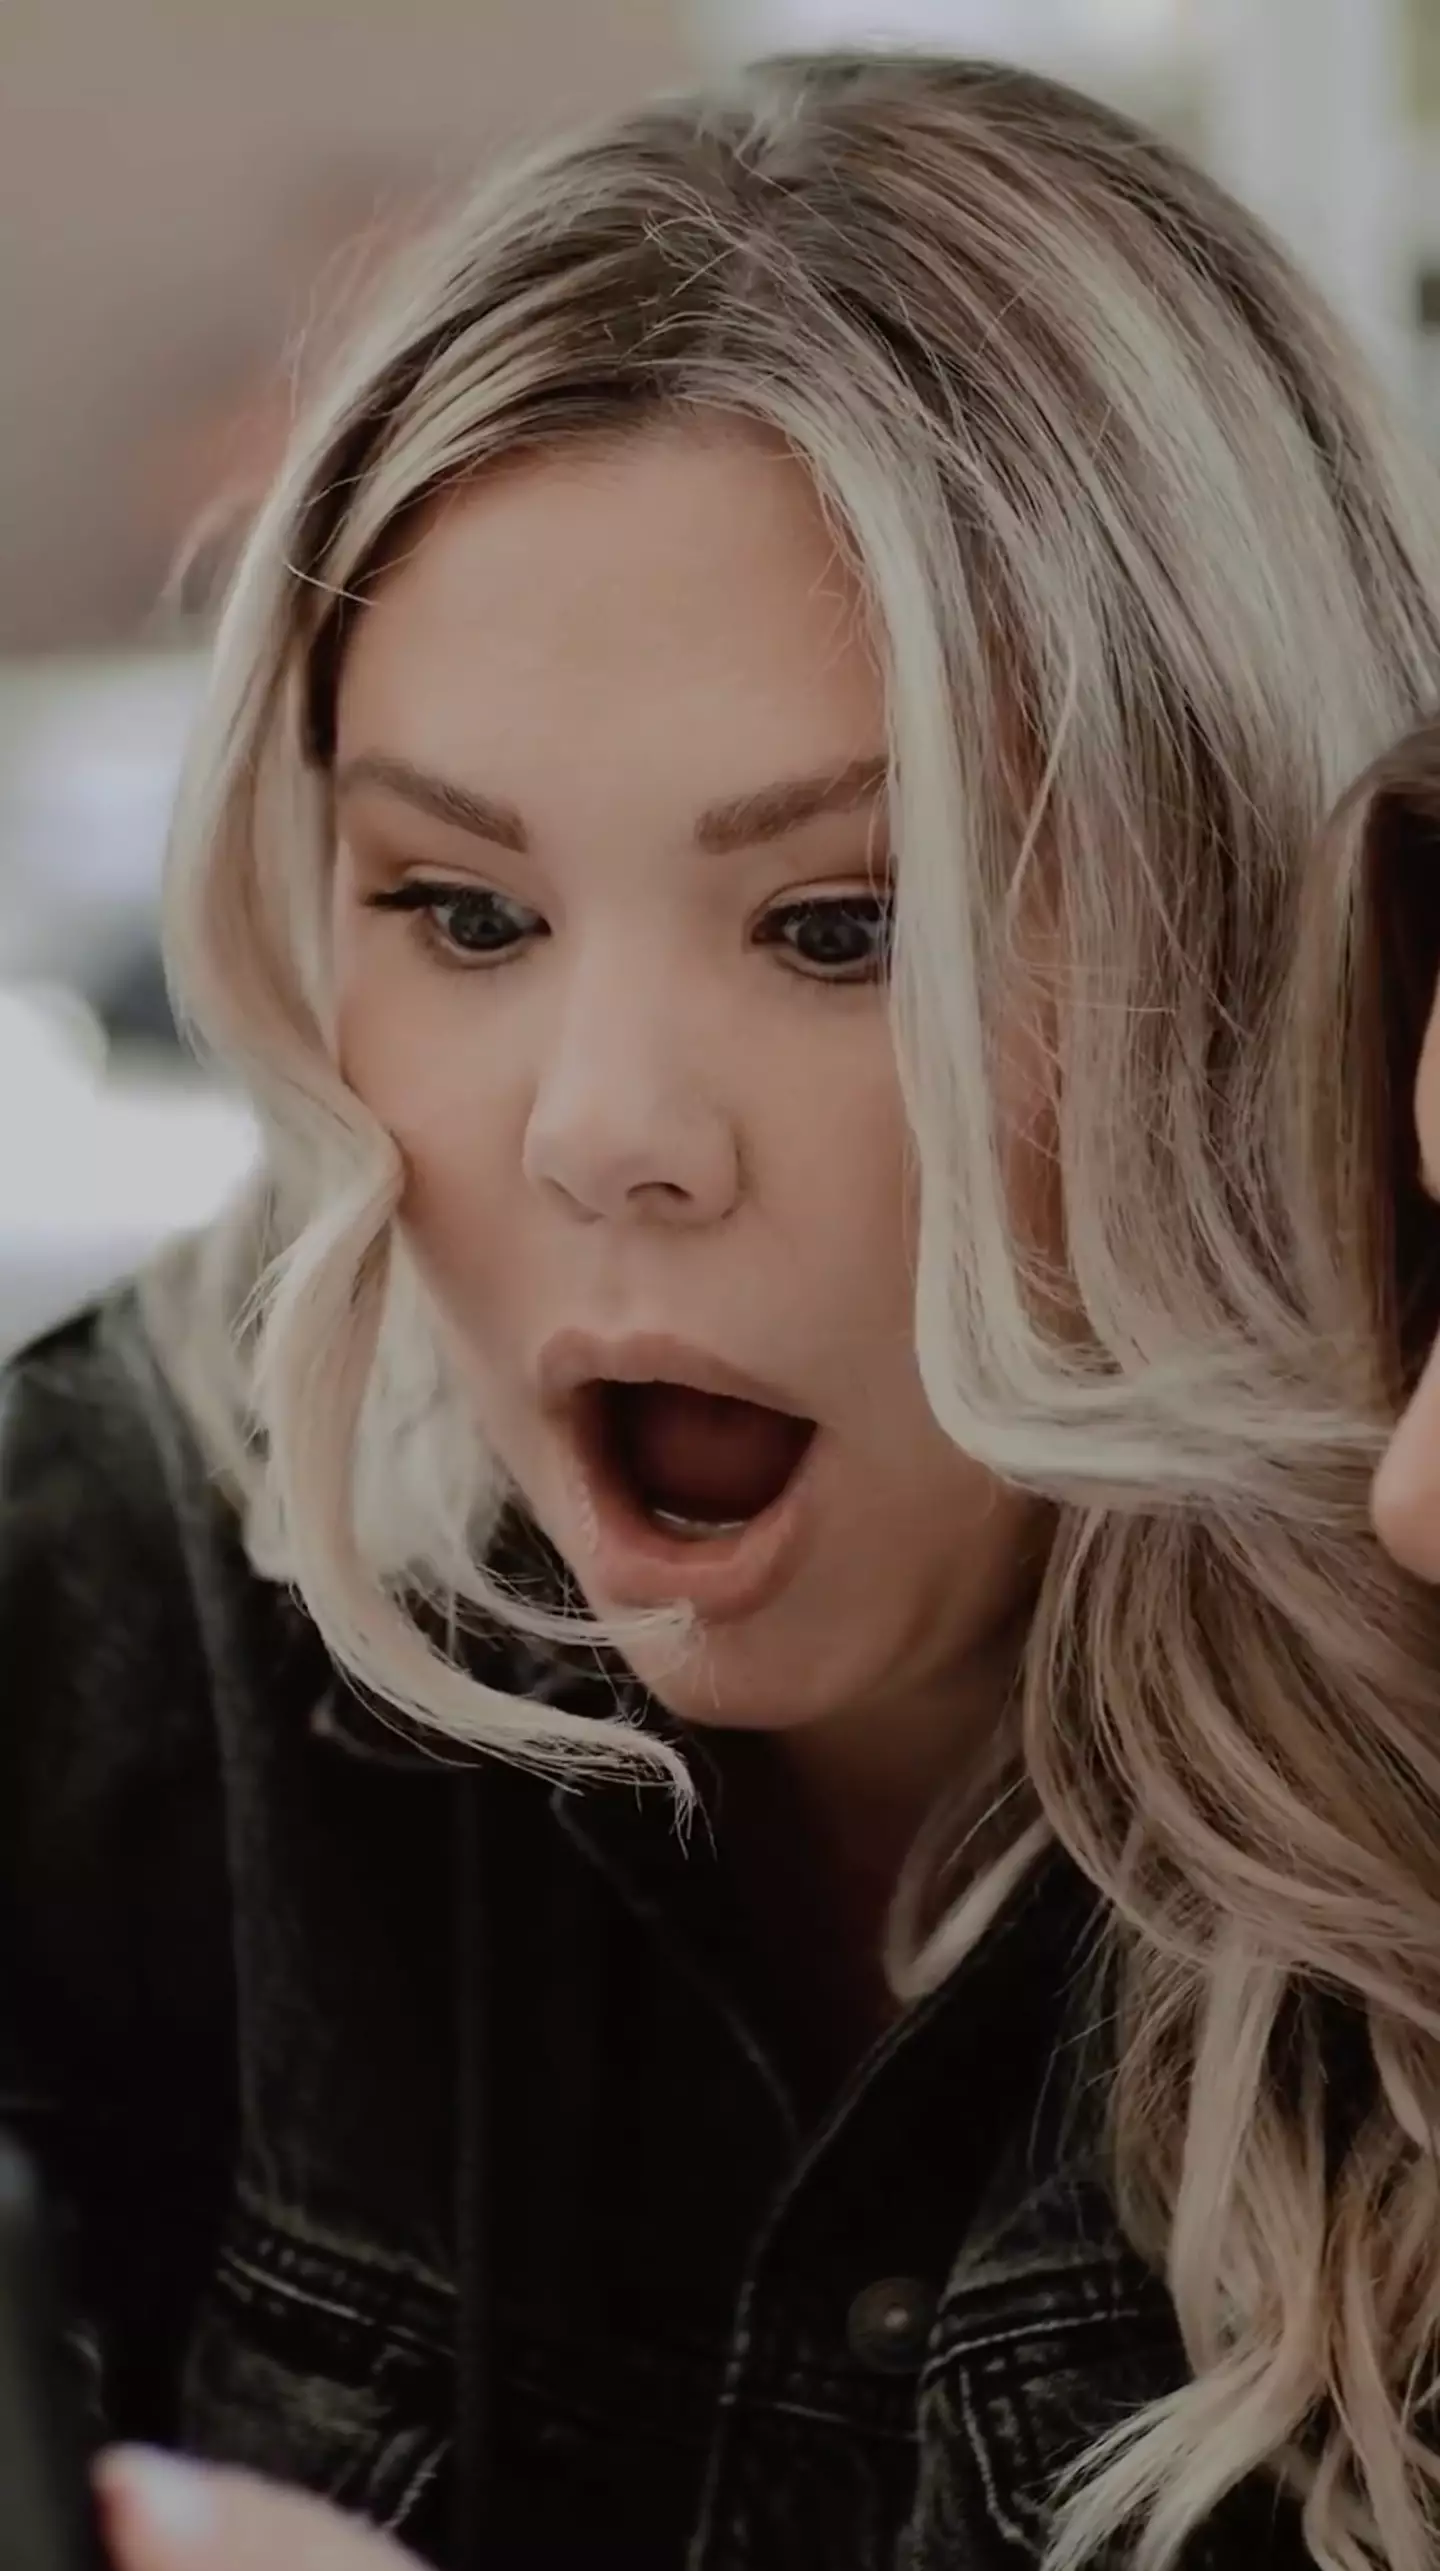 Kailyn Lowry was shocked to find out she was having twin boys.